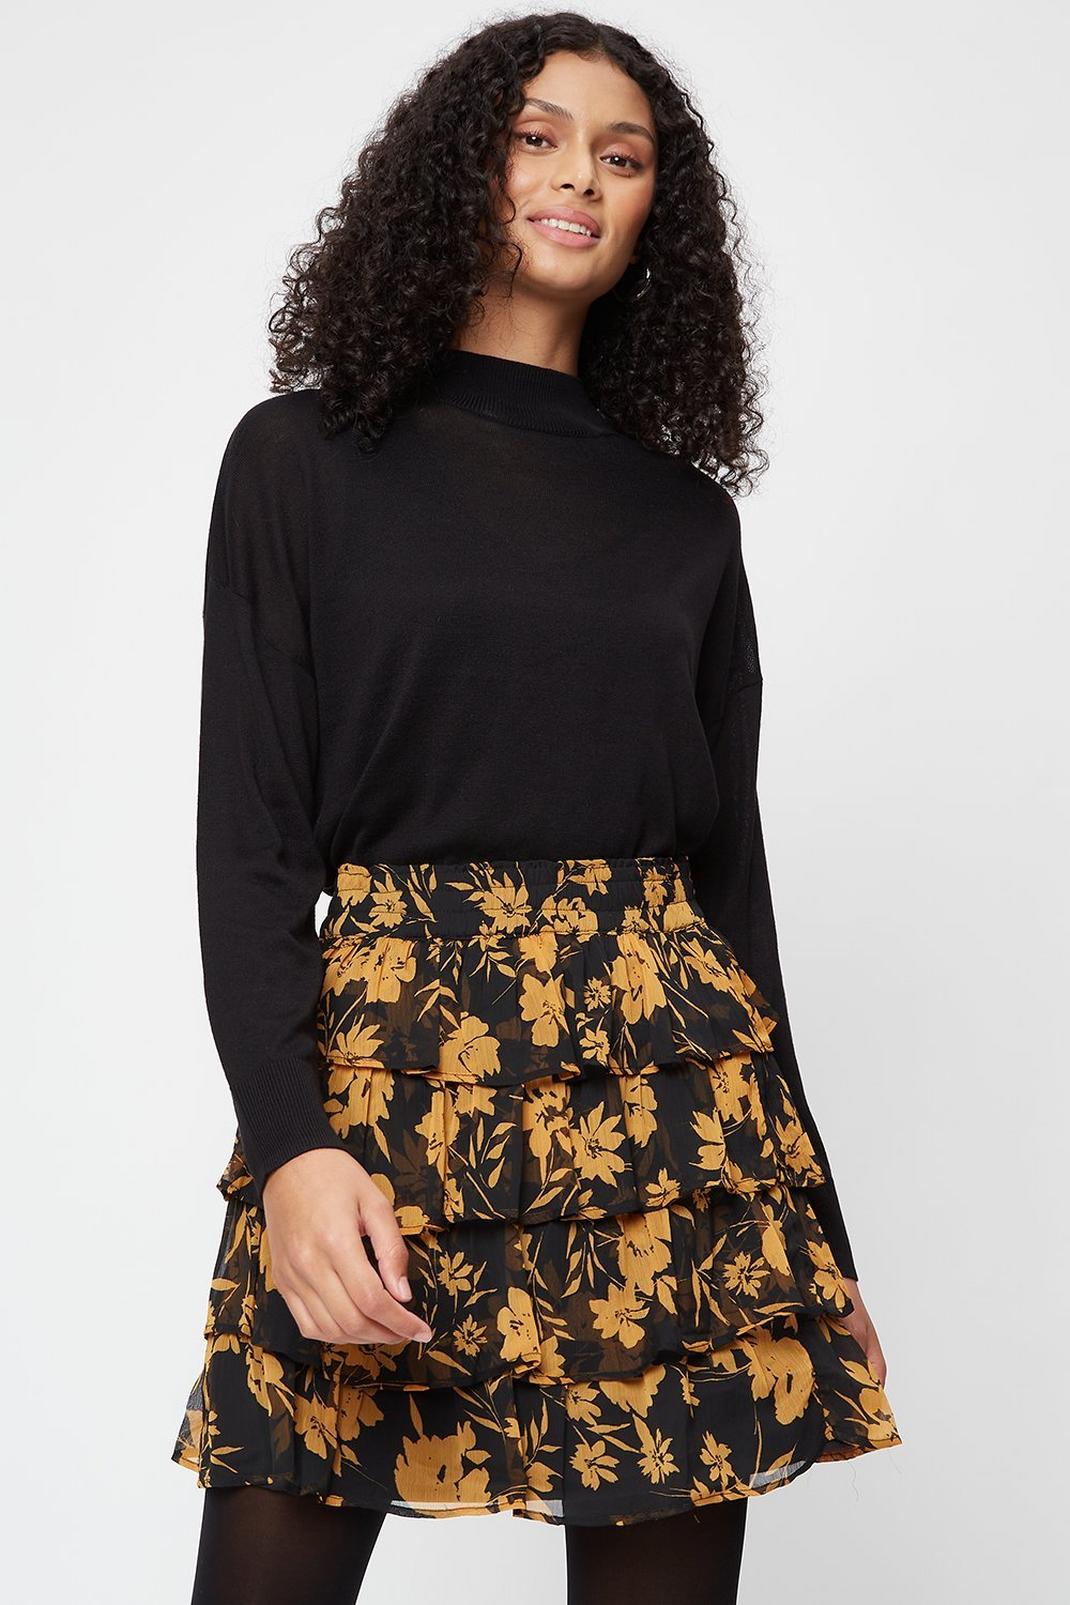 Ochre Floral Tiered Chiffon Mini Skirt image number 1